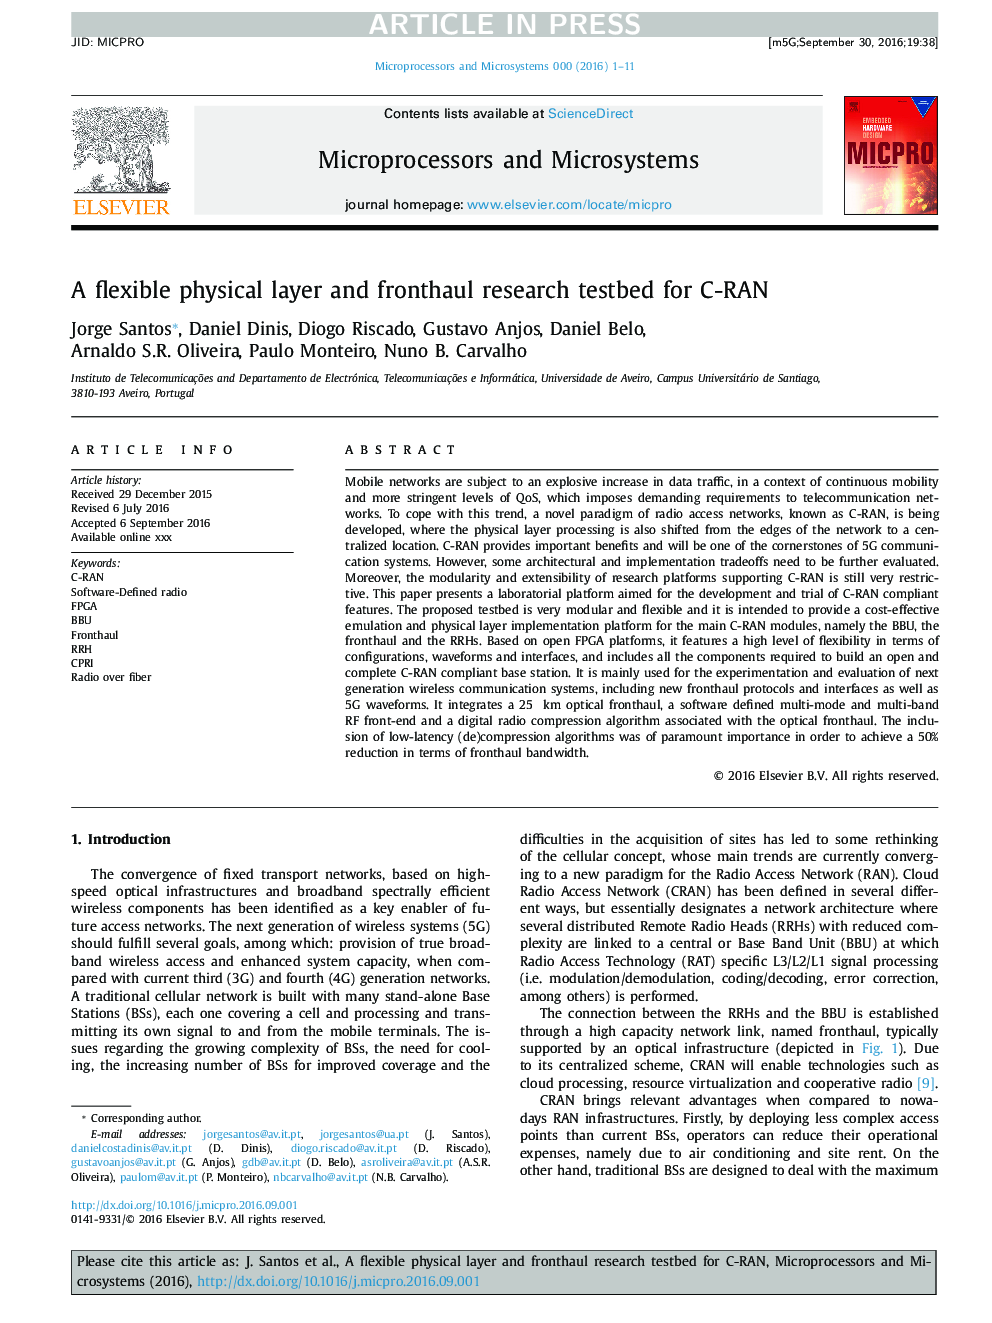 A flexible physical layer and fronthaul research testbed for C-RAN